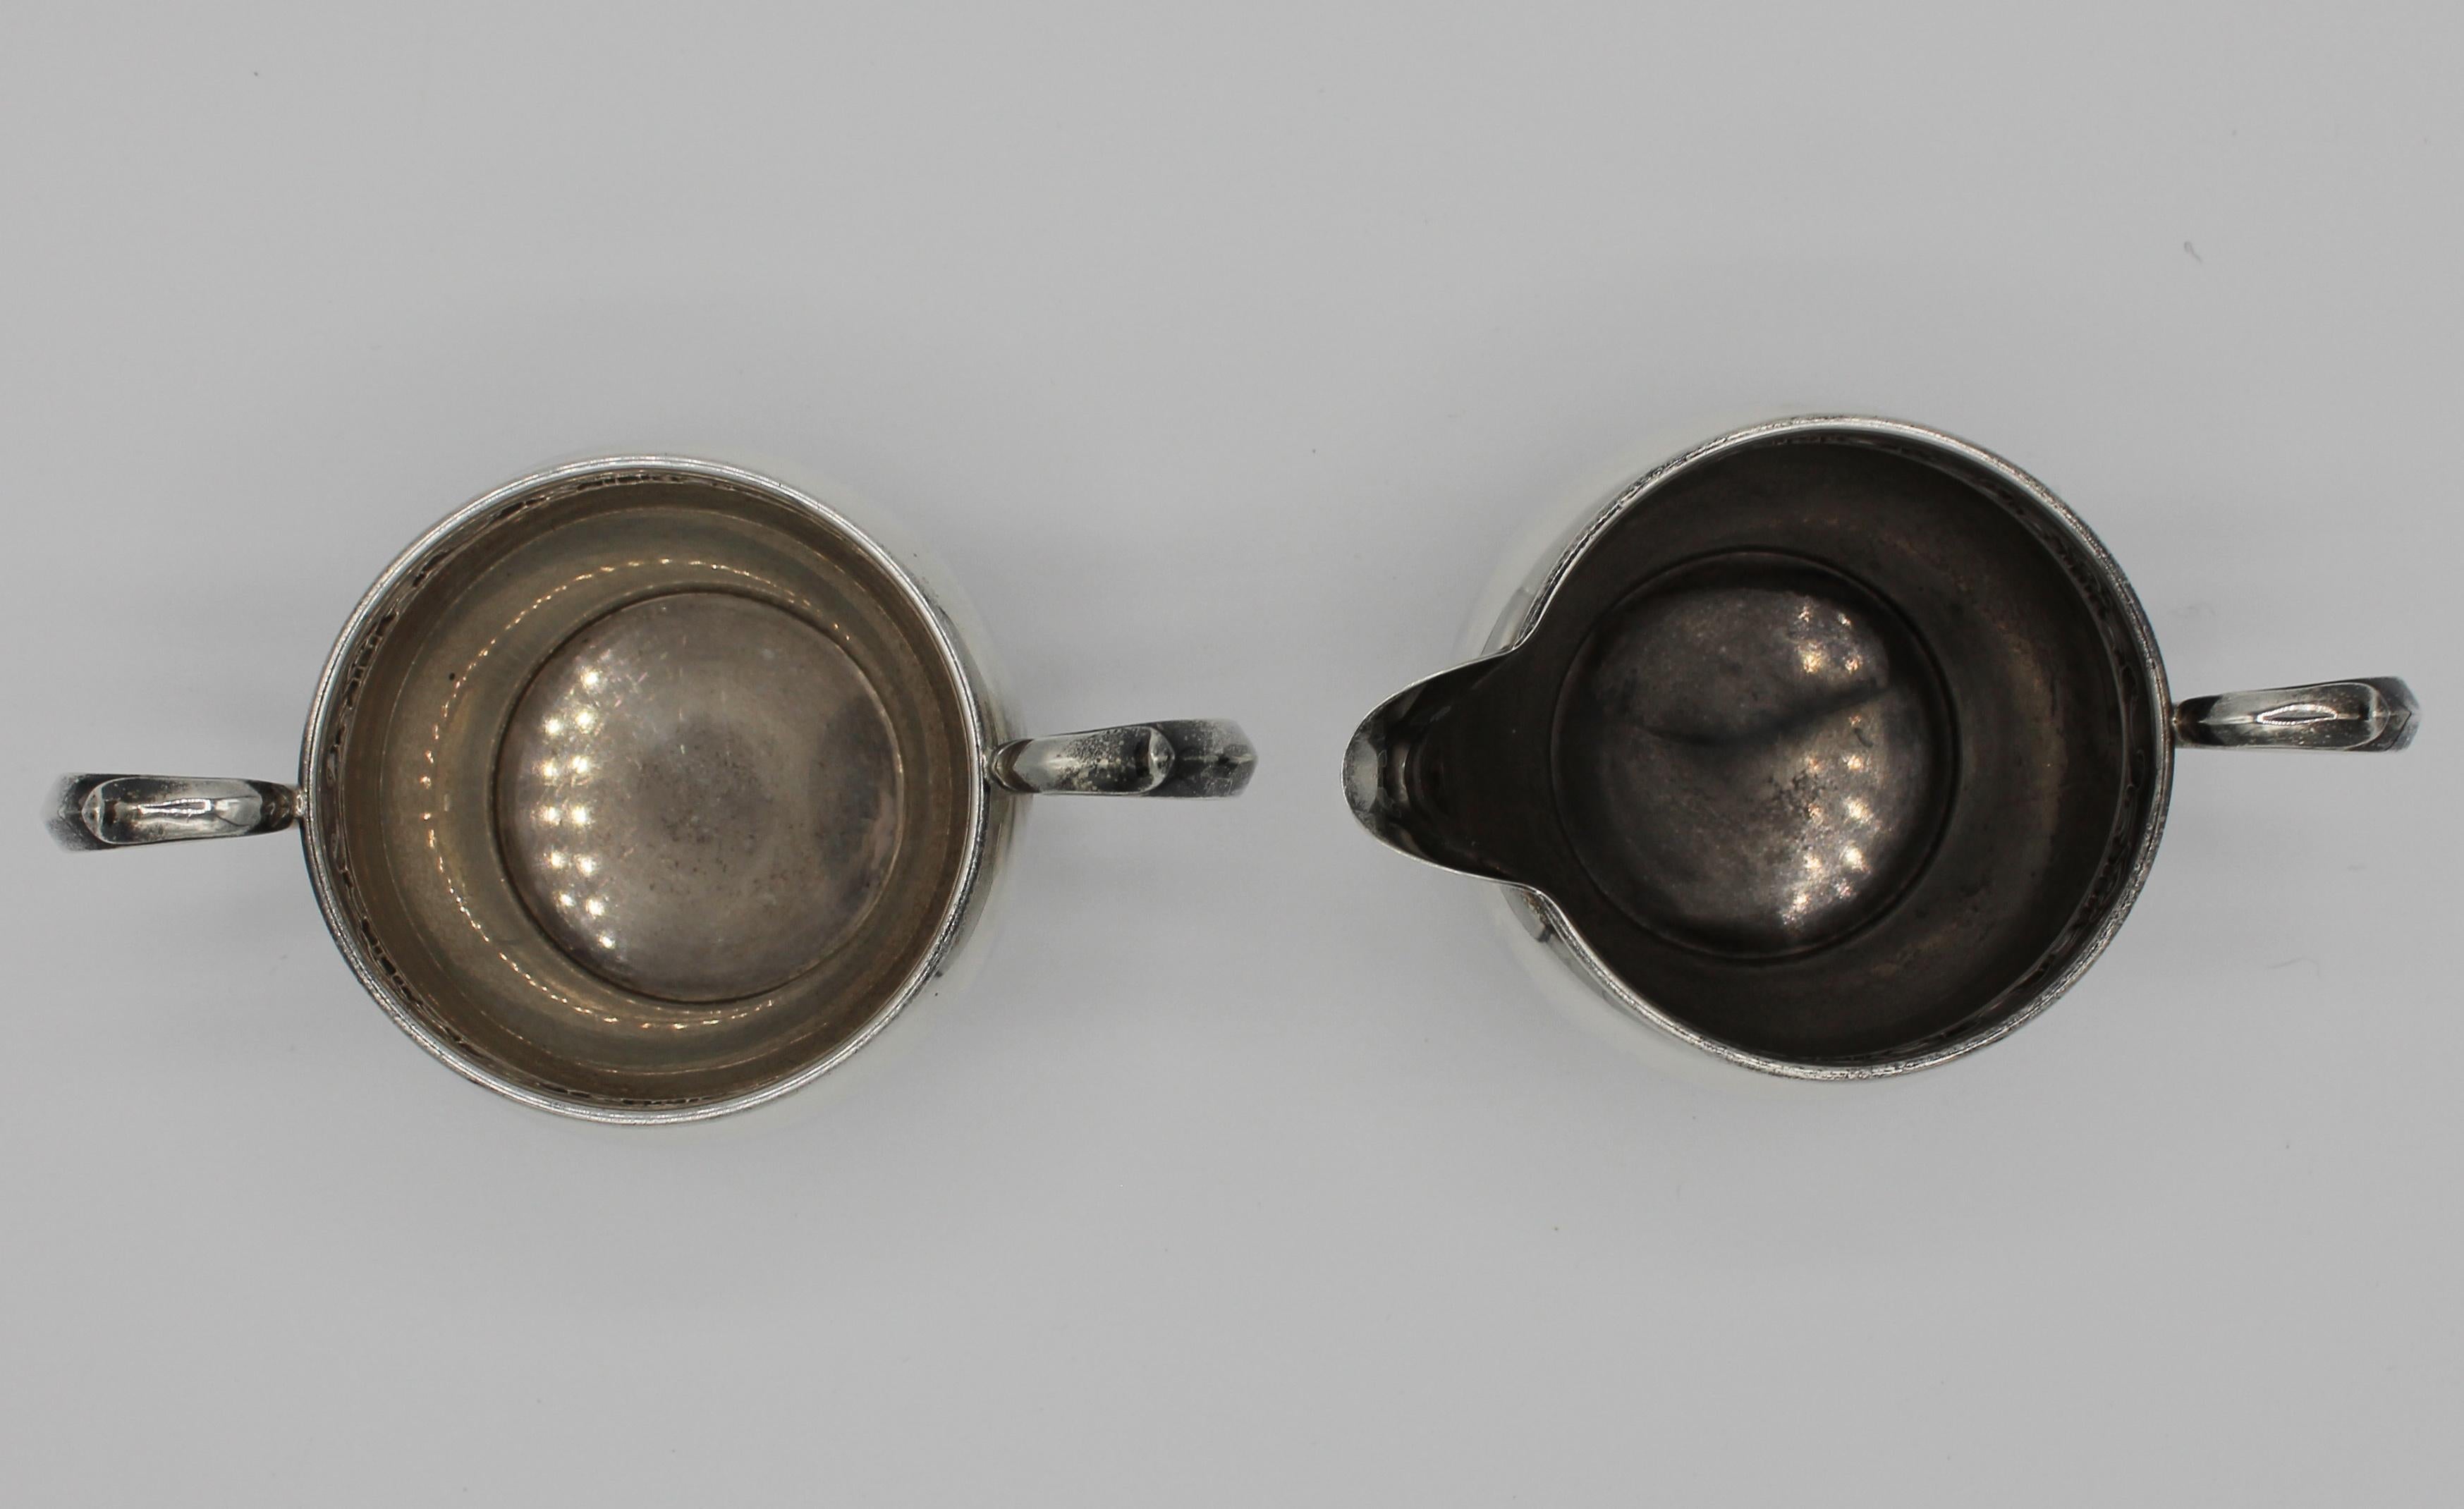 Early-mid 20th century sterling cream and sugar, by Gorham, Strasbourg pattern, c-scroll and cartouche border. Creamer marked 1133, sugar marked 1132. 5.95 troy oz. 5 5/8